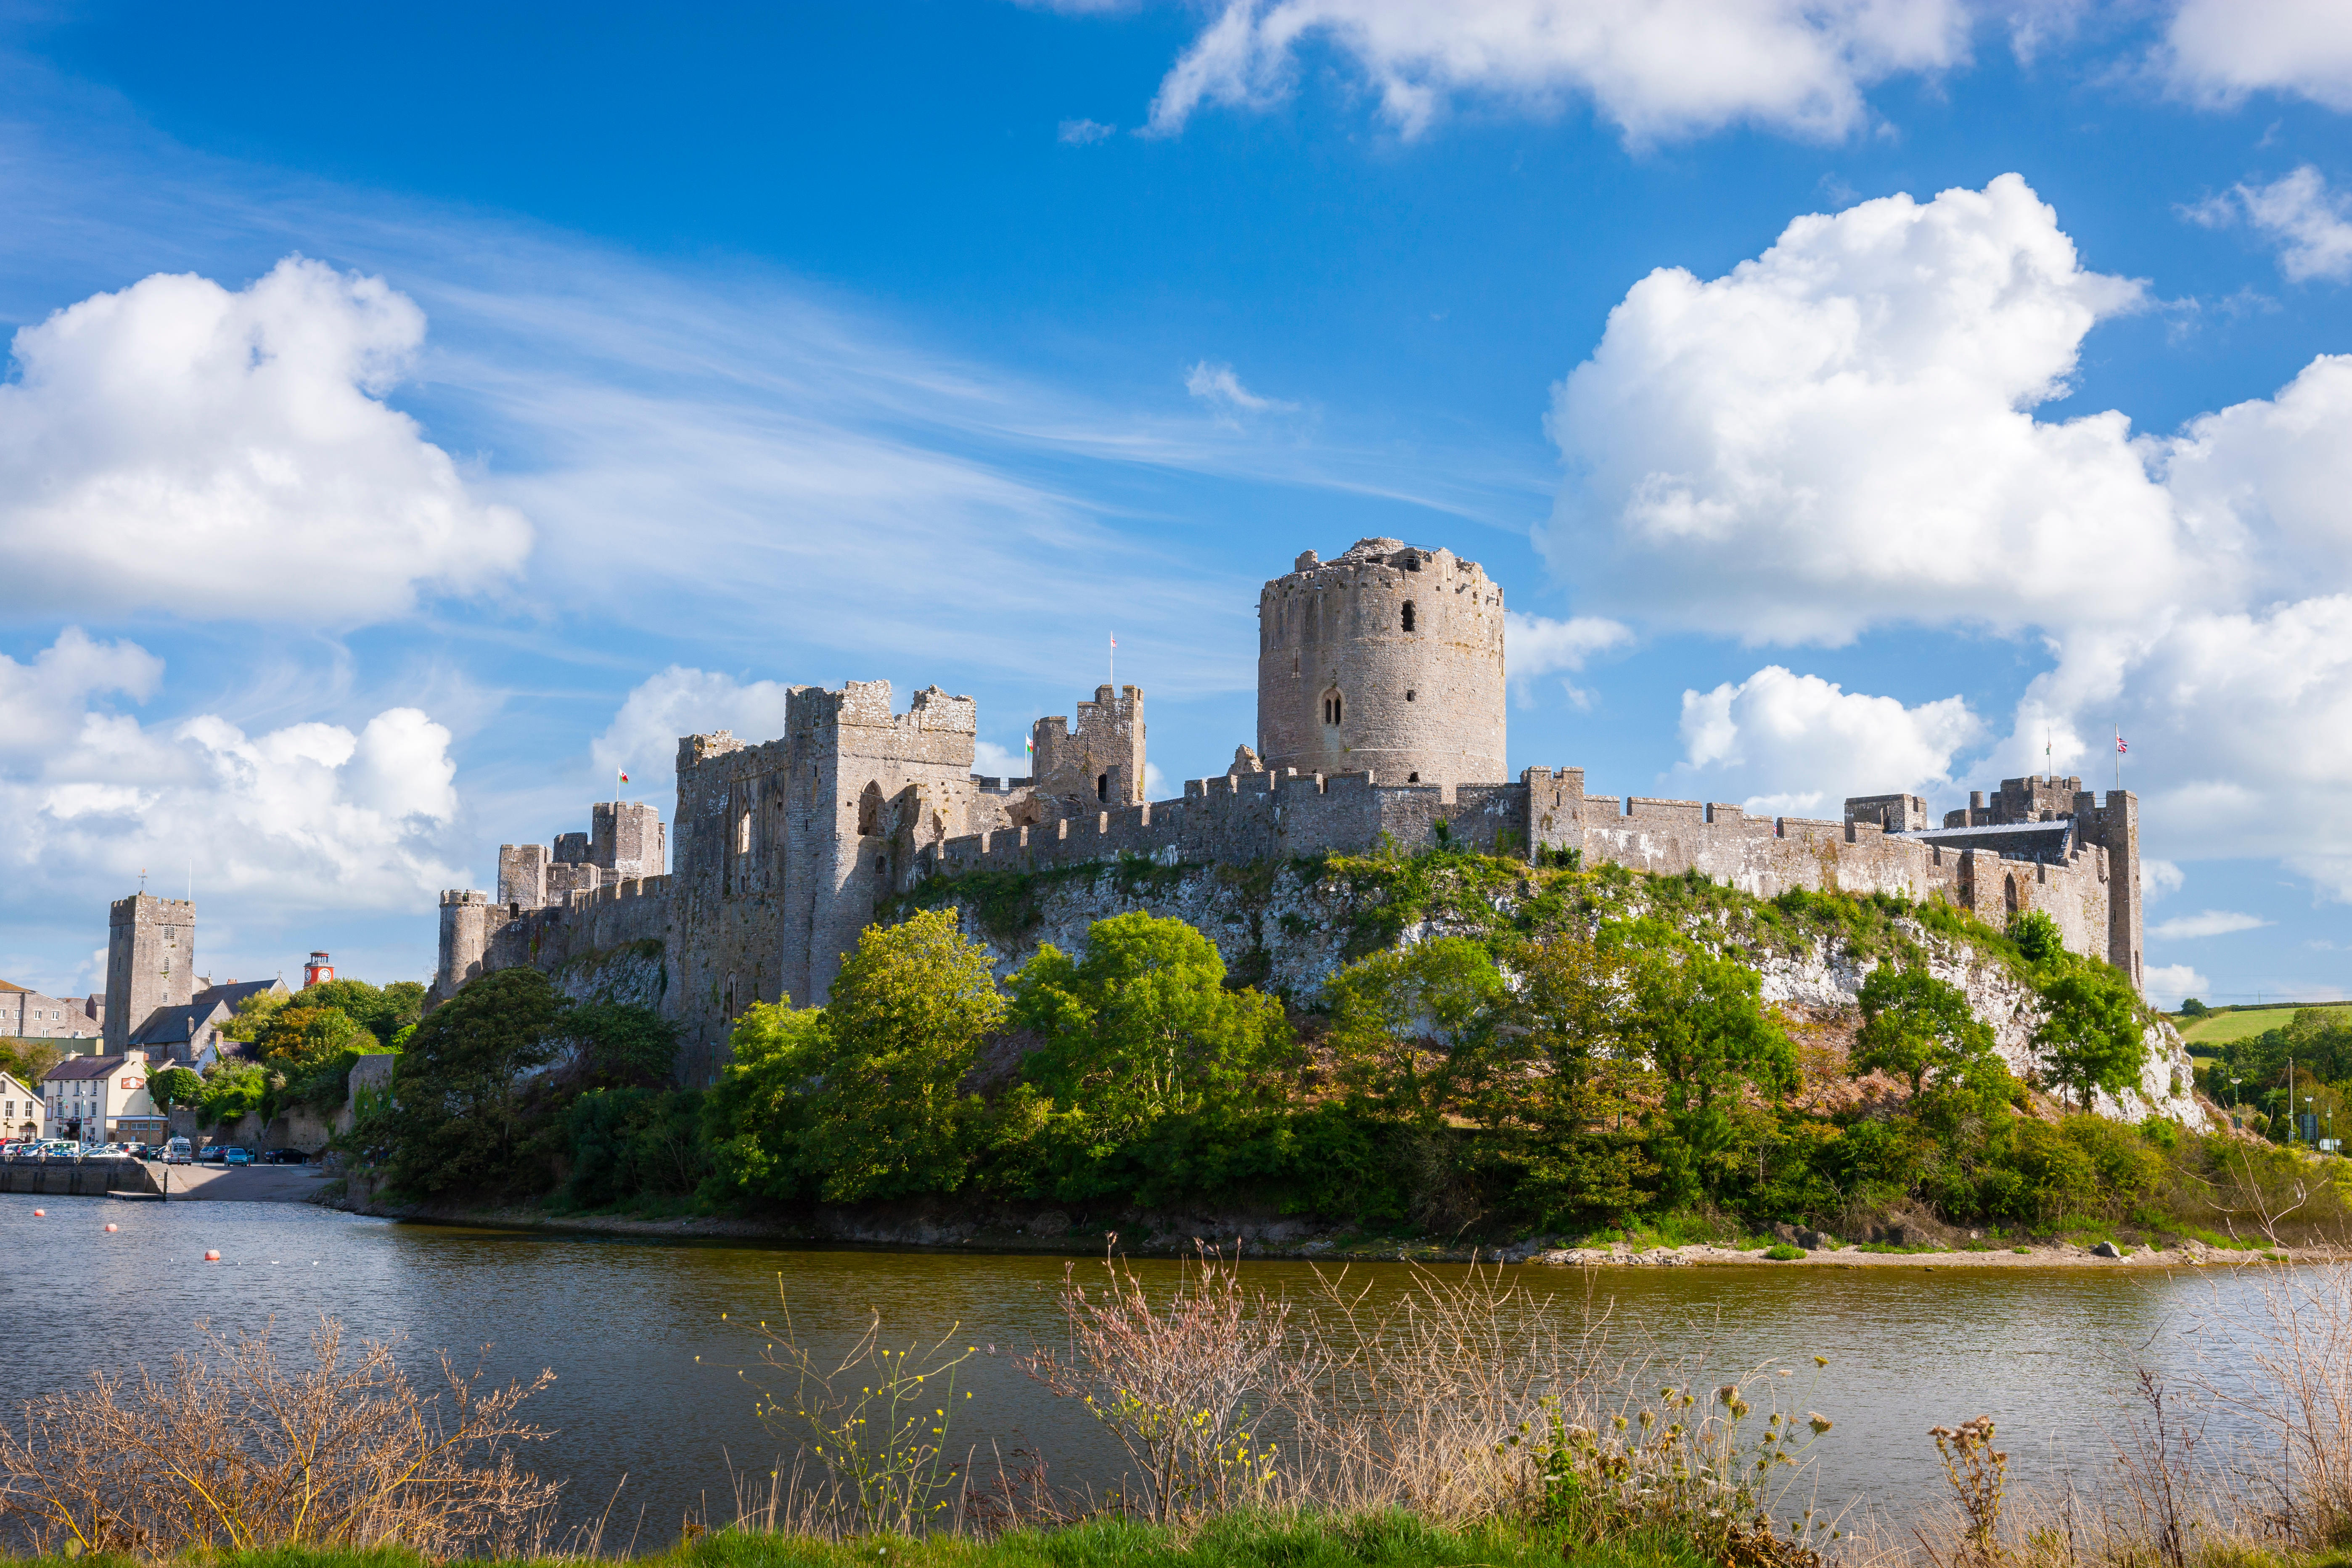 Pembroke Castle was restored in the early 20th Century and has been a popular tourist attraction since